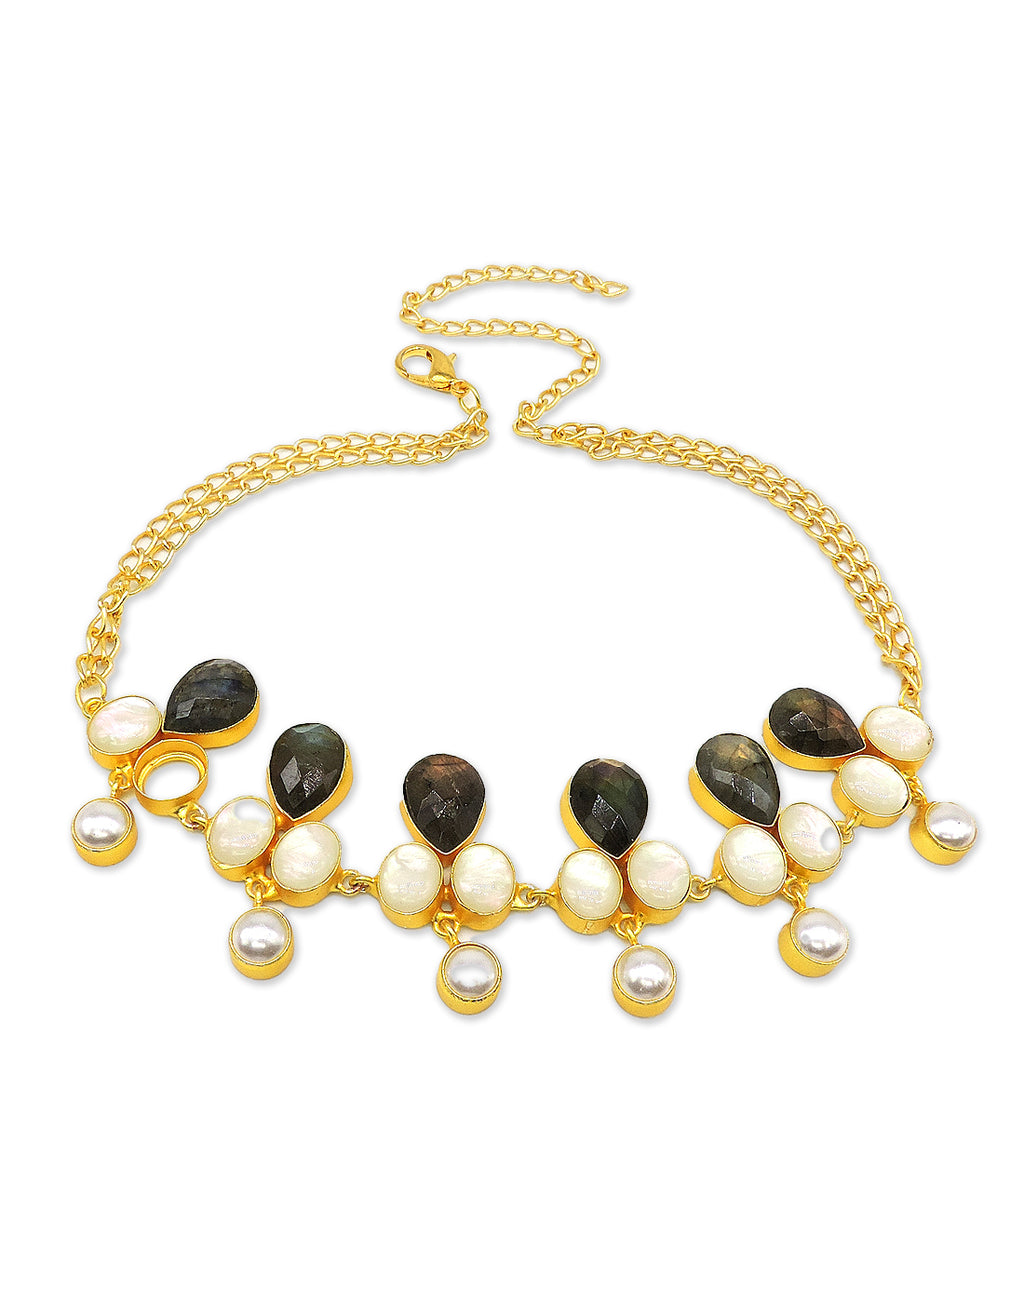 Labradorite & Shell Necklace - Statement Necklaces - Gold-Plated & Hypoallergenic Jewellery - Made in India - Dubai Jewellery - Dori